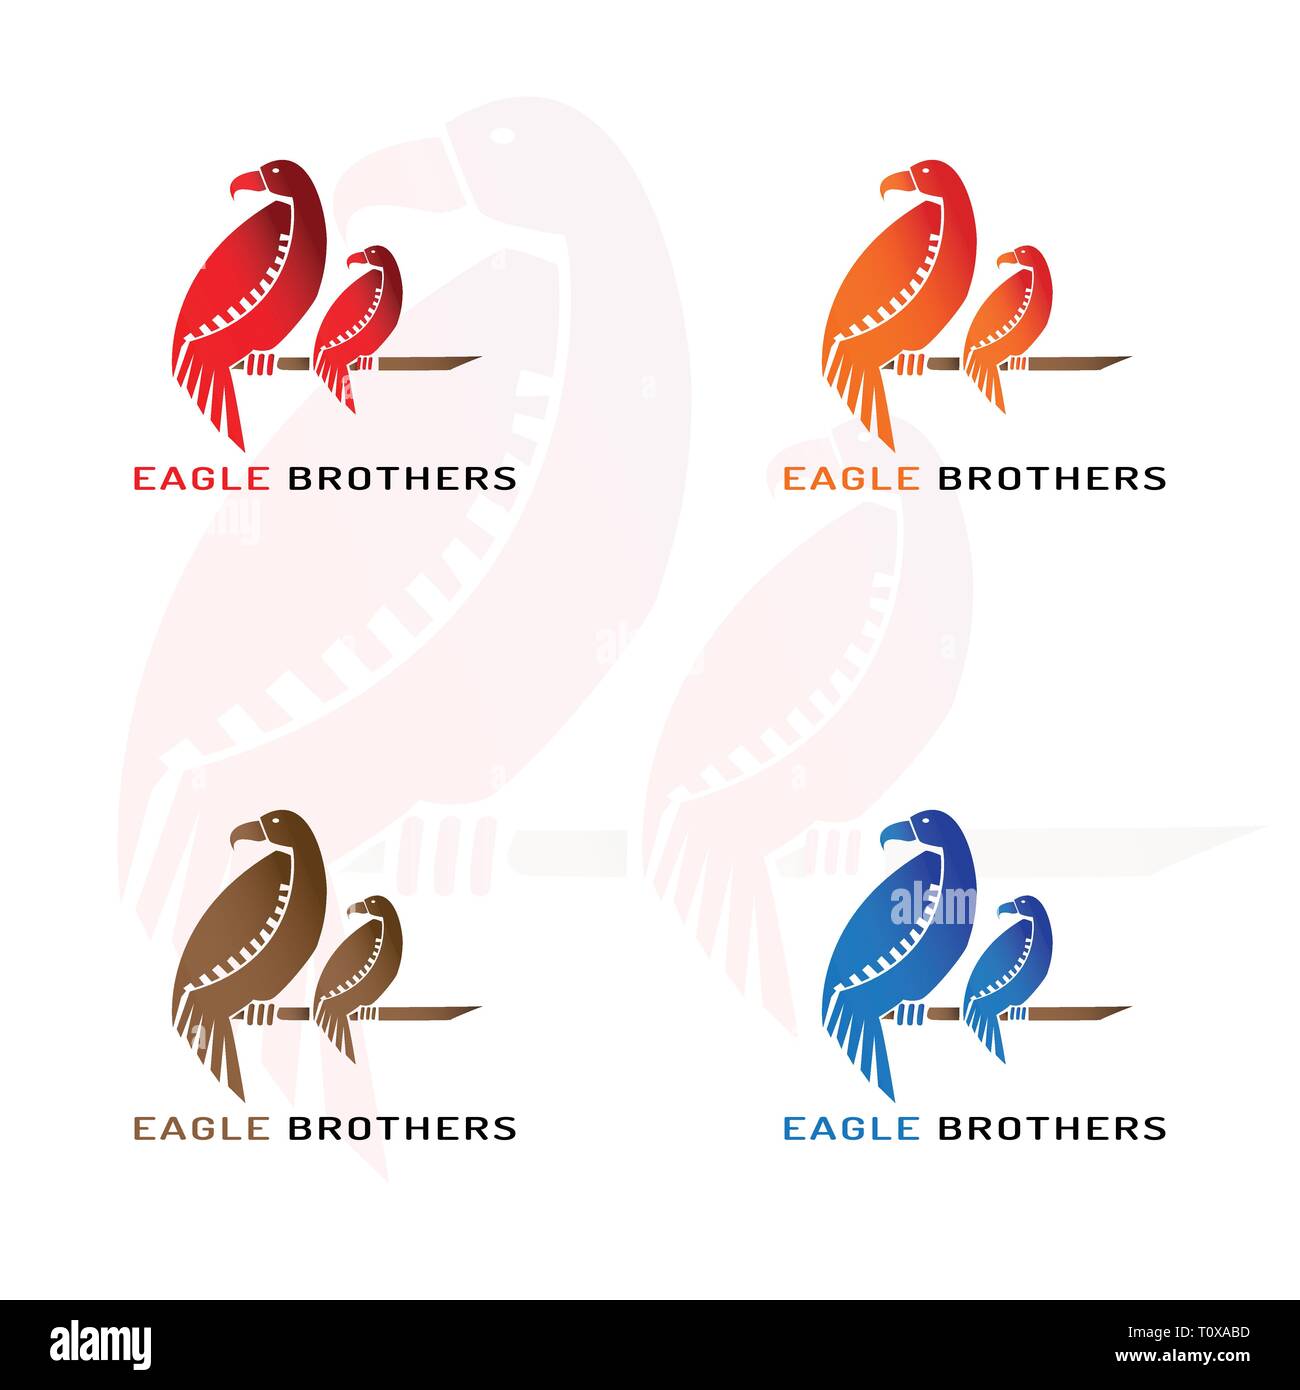 This logo is a picture of two eagle brothers clutching a tree trunk. This logo is good to use as company logos. Stock Vector